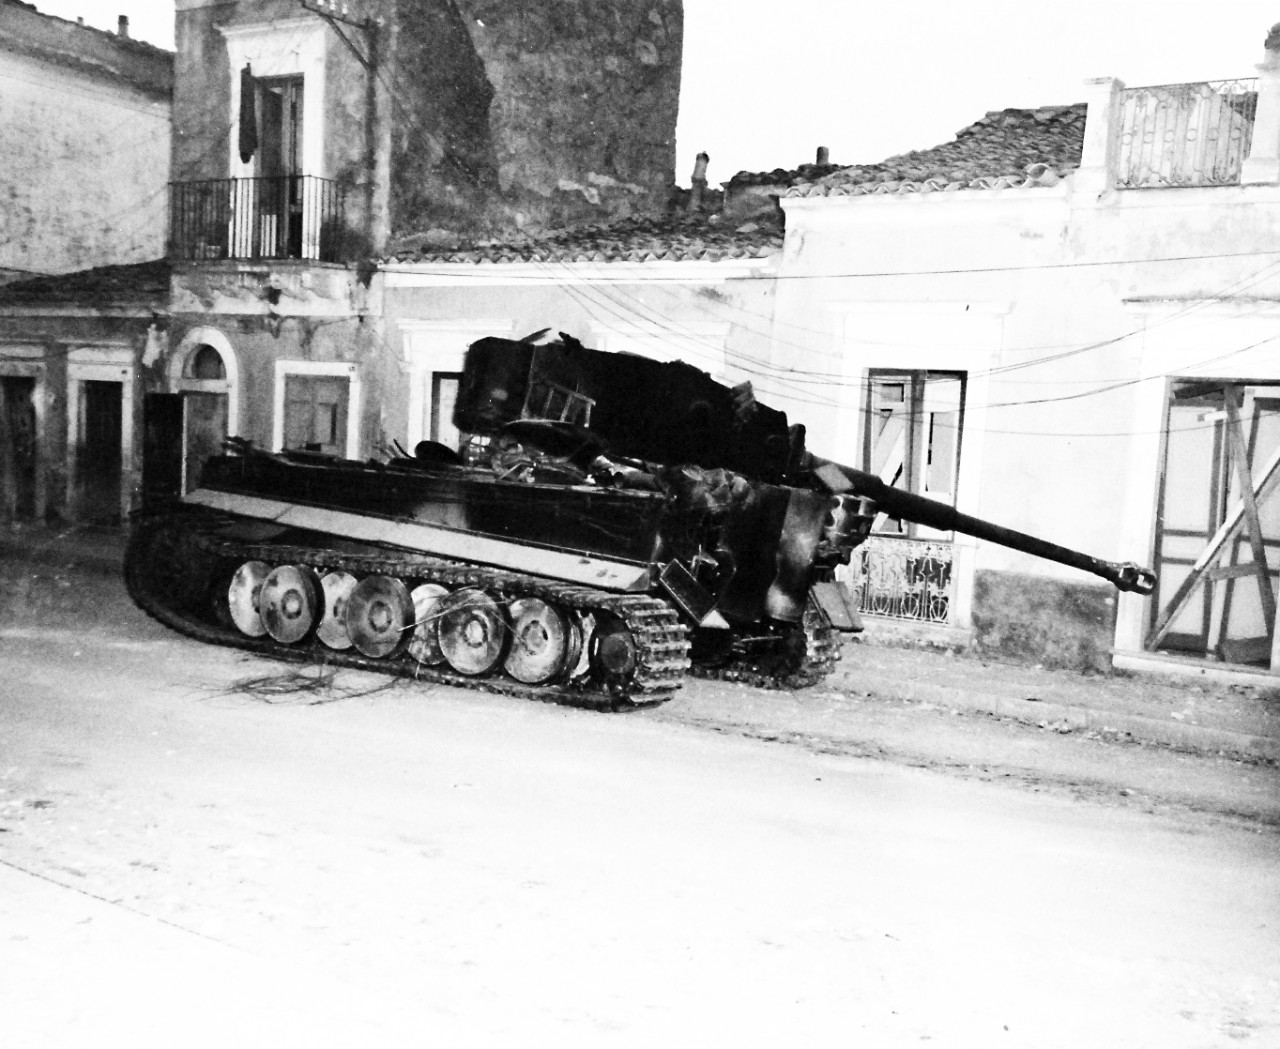 80-G-86226:  Operation Husky, July-August 1943.  Battle damage shown after successful landing operations by the Allies in the invasion of Sicily.  Note: Wreckage of German Mark VI tank at Biscari.     Photograph received July 14, 1943.      U.S. Navy Photograph, now in the collections of the National Archives.  (2017/01/17).